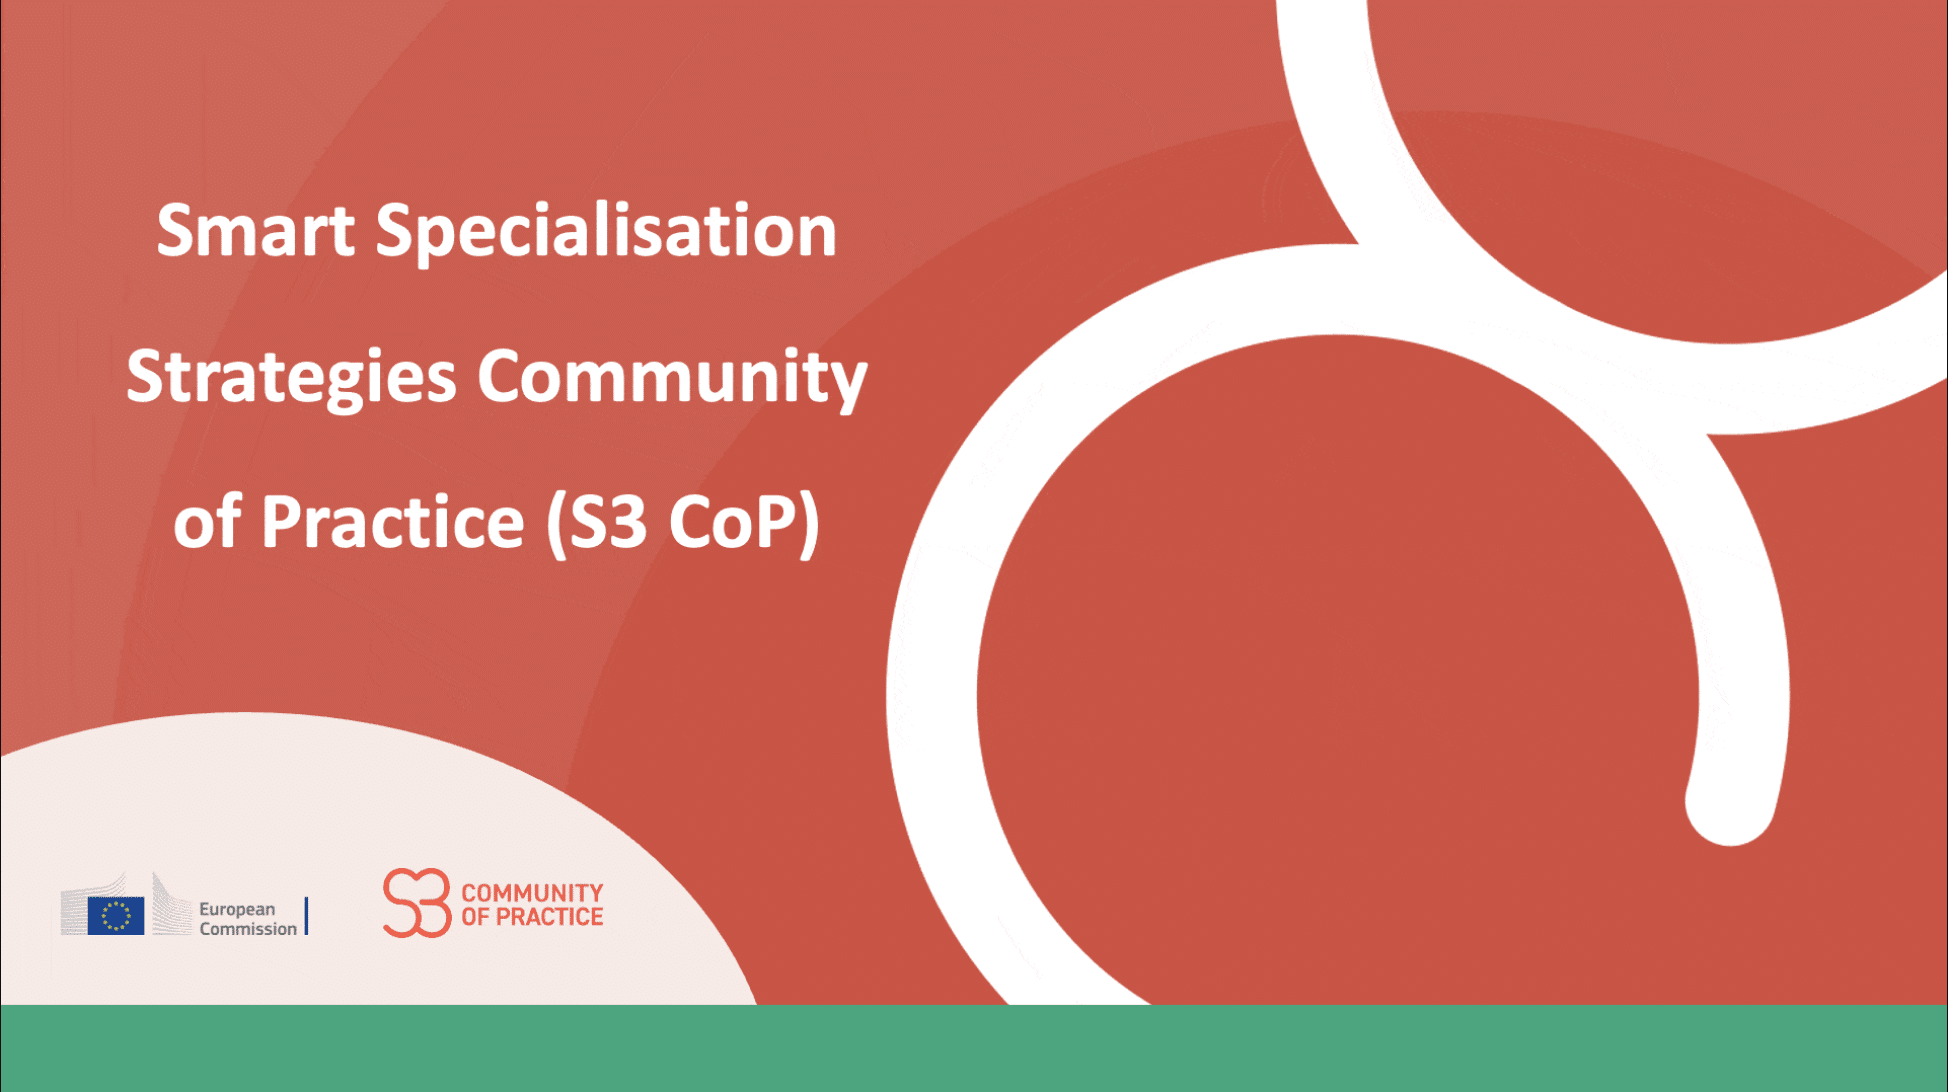  The Smart Specialisation Community of Practice 